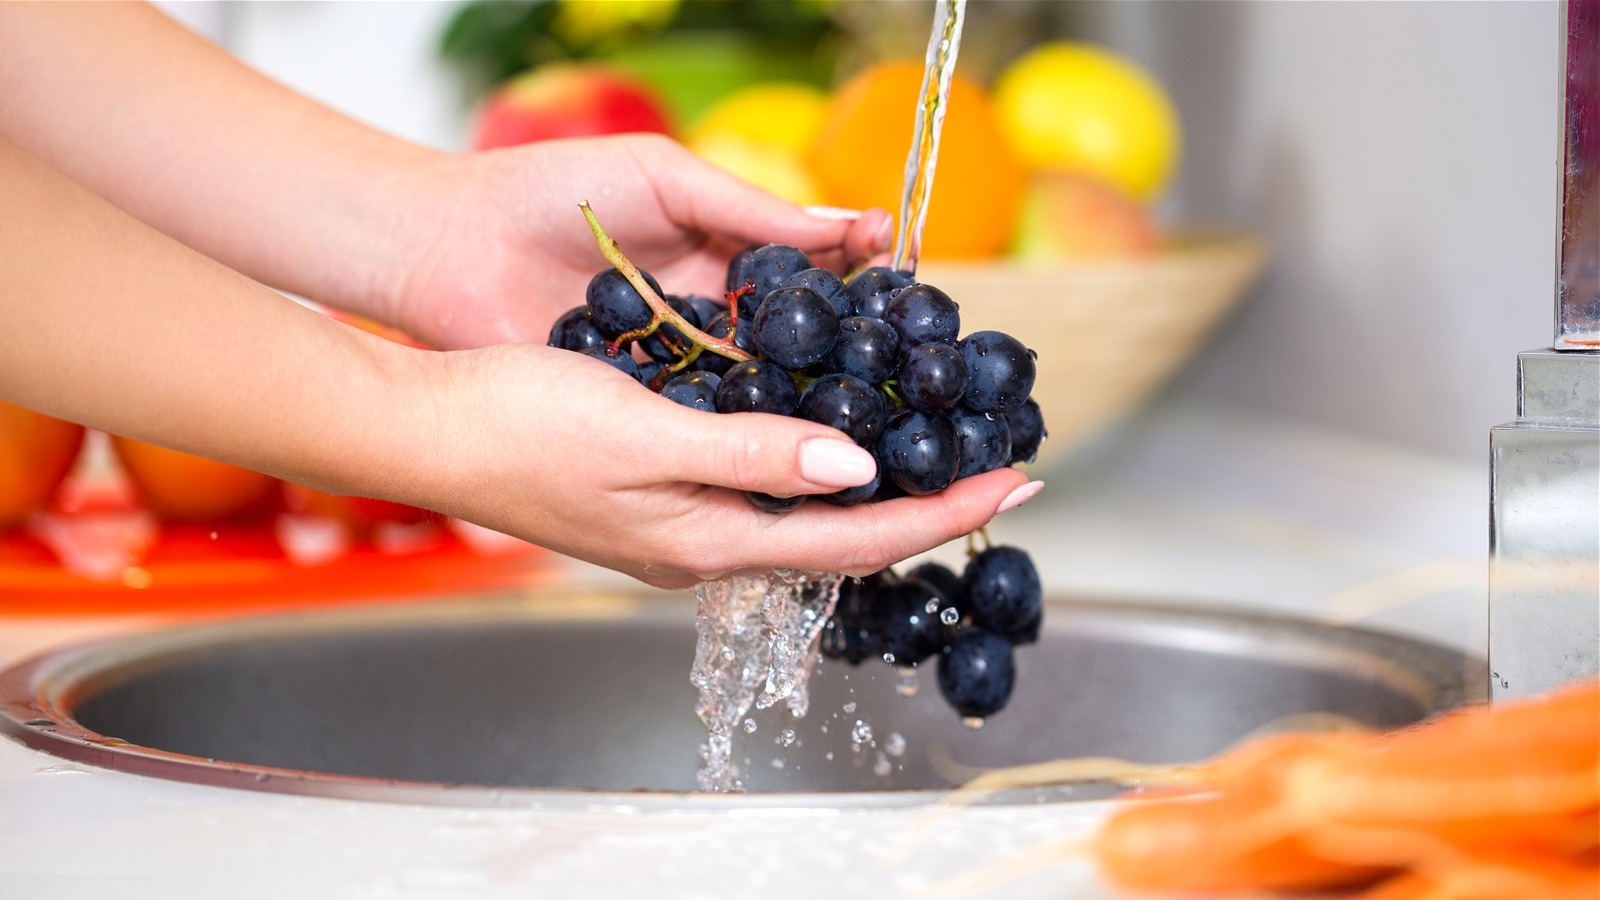 How to Wash Grapes So They Stay Fresh